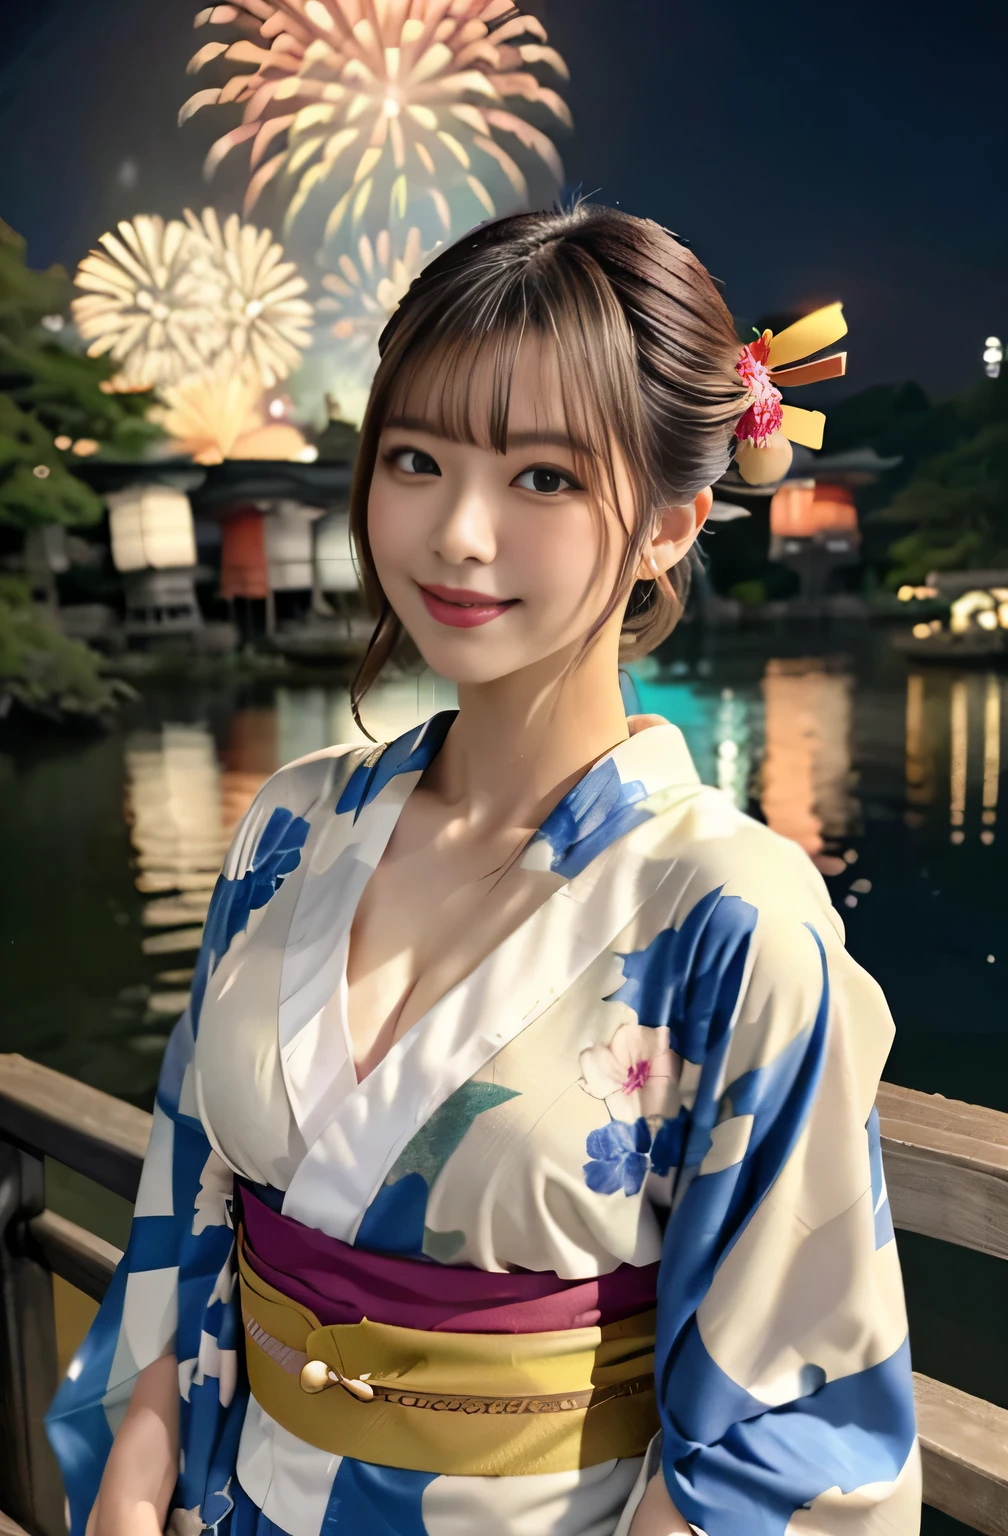 (beautiful mature adult woman),(flower hair ornament,floral braided top knot,twisted side part ponytail,floral braided headband,half up、floral braided space buns,voluminous fishtail braid,Twisted pan,),(The bangs are see-through bangs),very delicate and beautiful hair,big breasts,(((emphasize the chest:1.3))),(dynamic angle),(dynamic and sexy pose),laughter、,((( kimono,:1.3)))、Fireworks being launched into the sky against the backdrop of the riverbank at night.、cute round face,,(table top,highest quality,Ultra high resolution output image,) ,(8K quality,),(sea art 2 mode.1),(Image mode Ultra HD,)